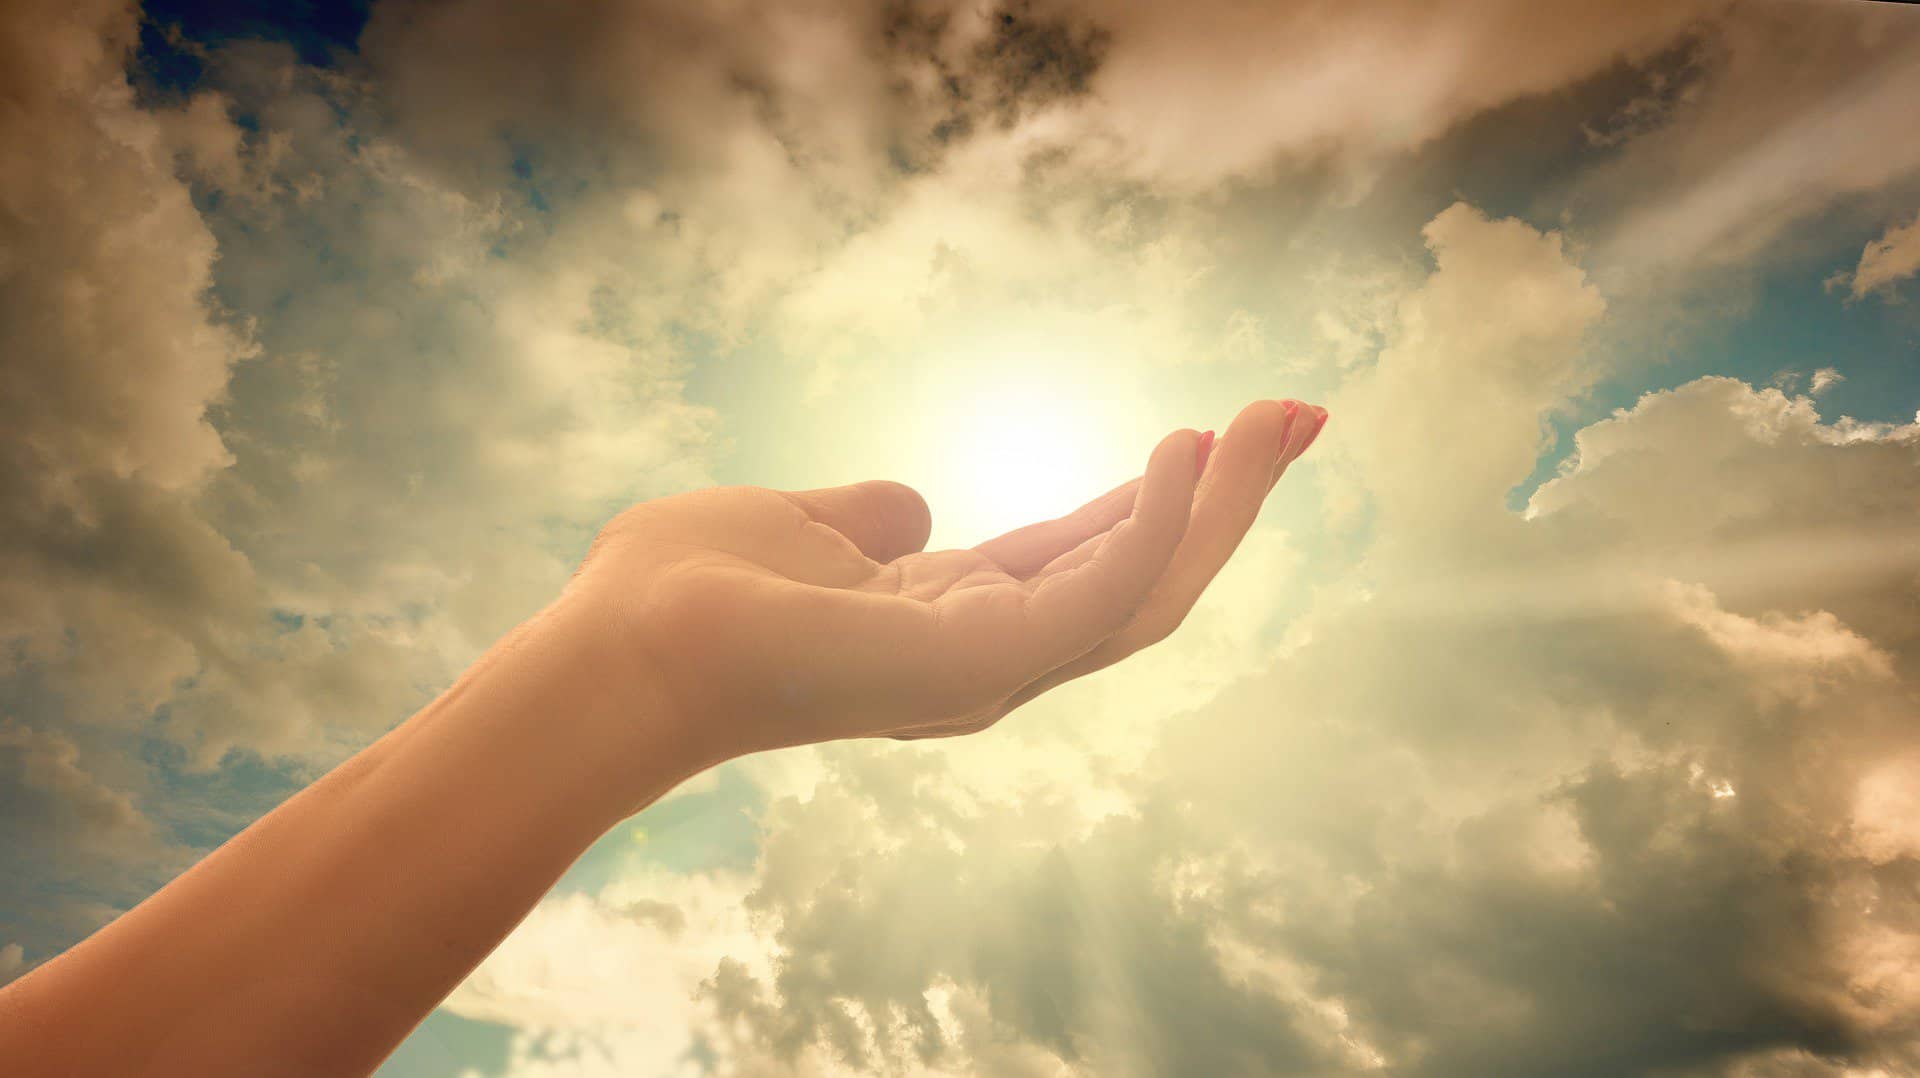 a woman's hand with short red painted nails is shown palm up and fingers relaxed against the backdrop of a sunlit cloud